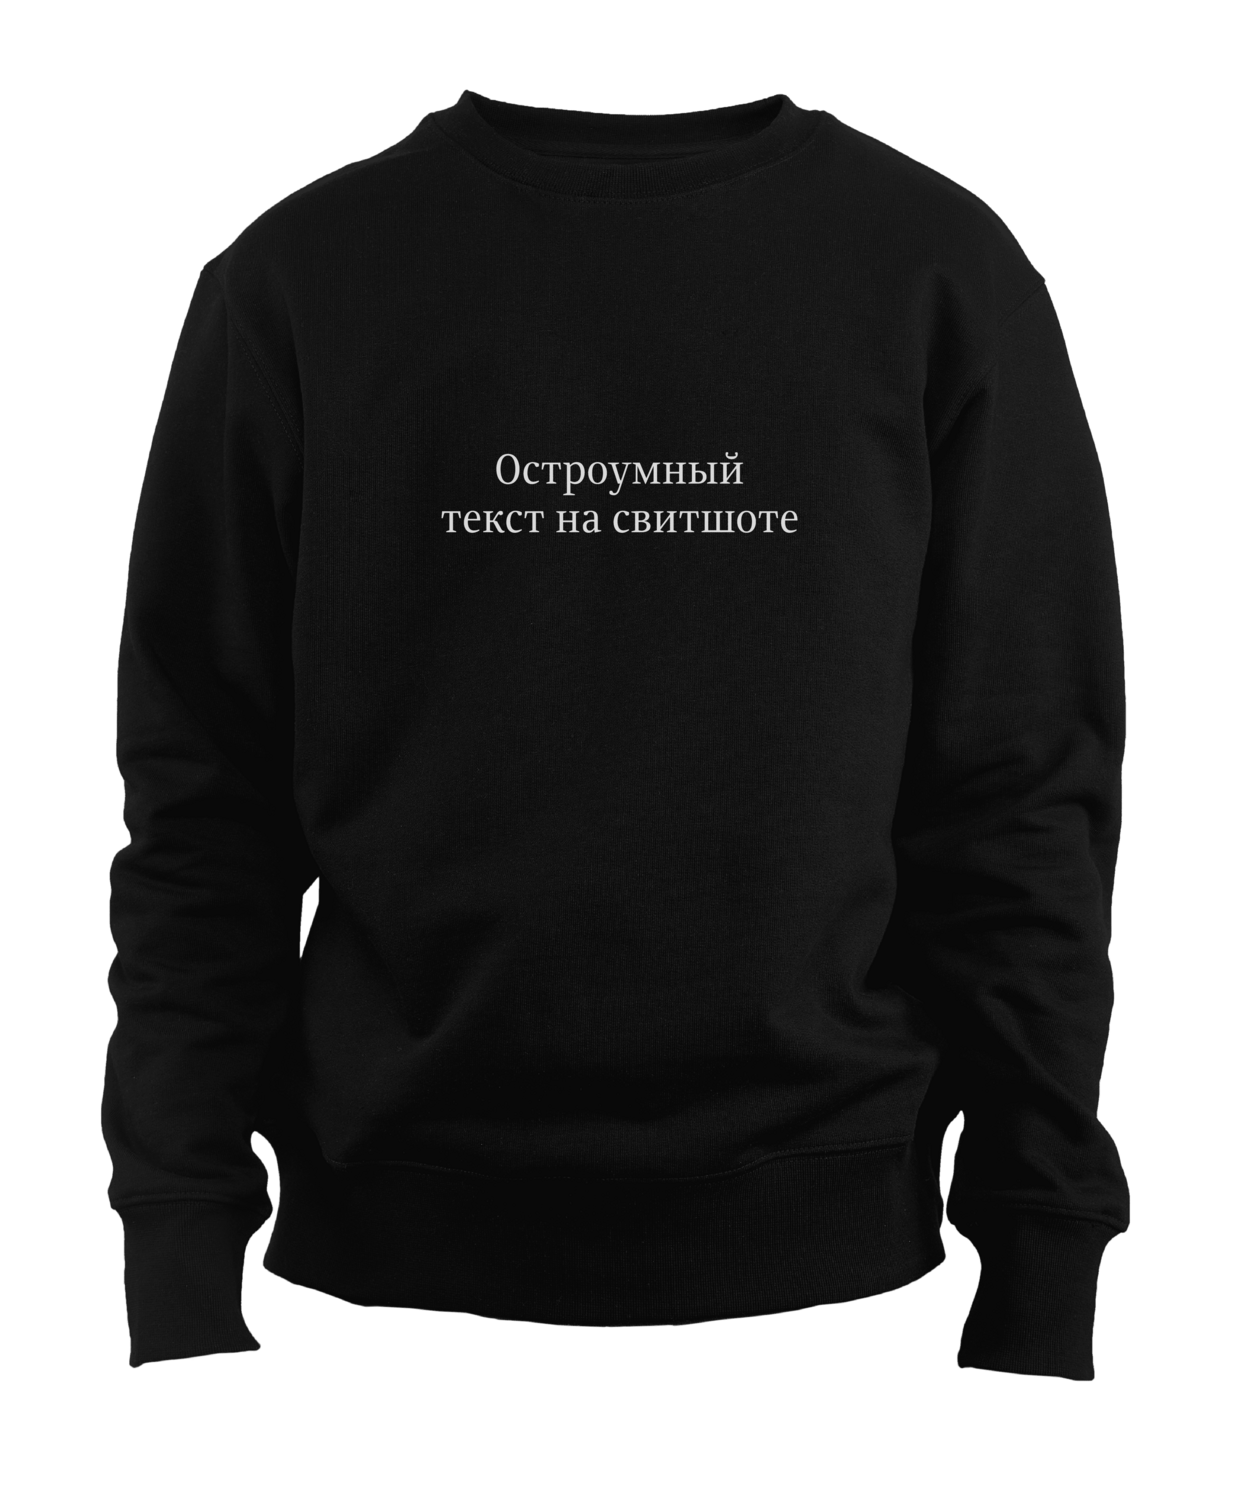 Sweatshirt with witty text